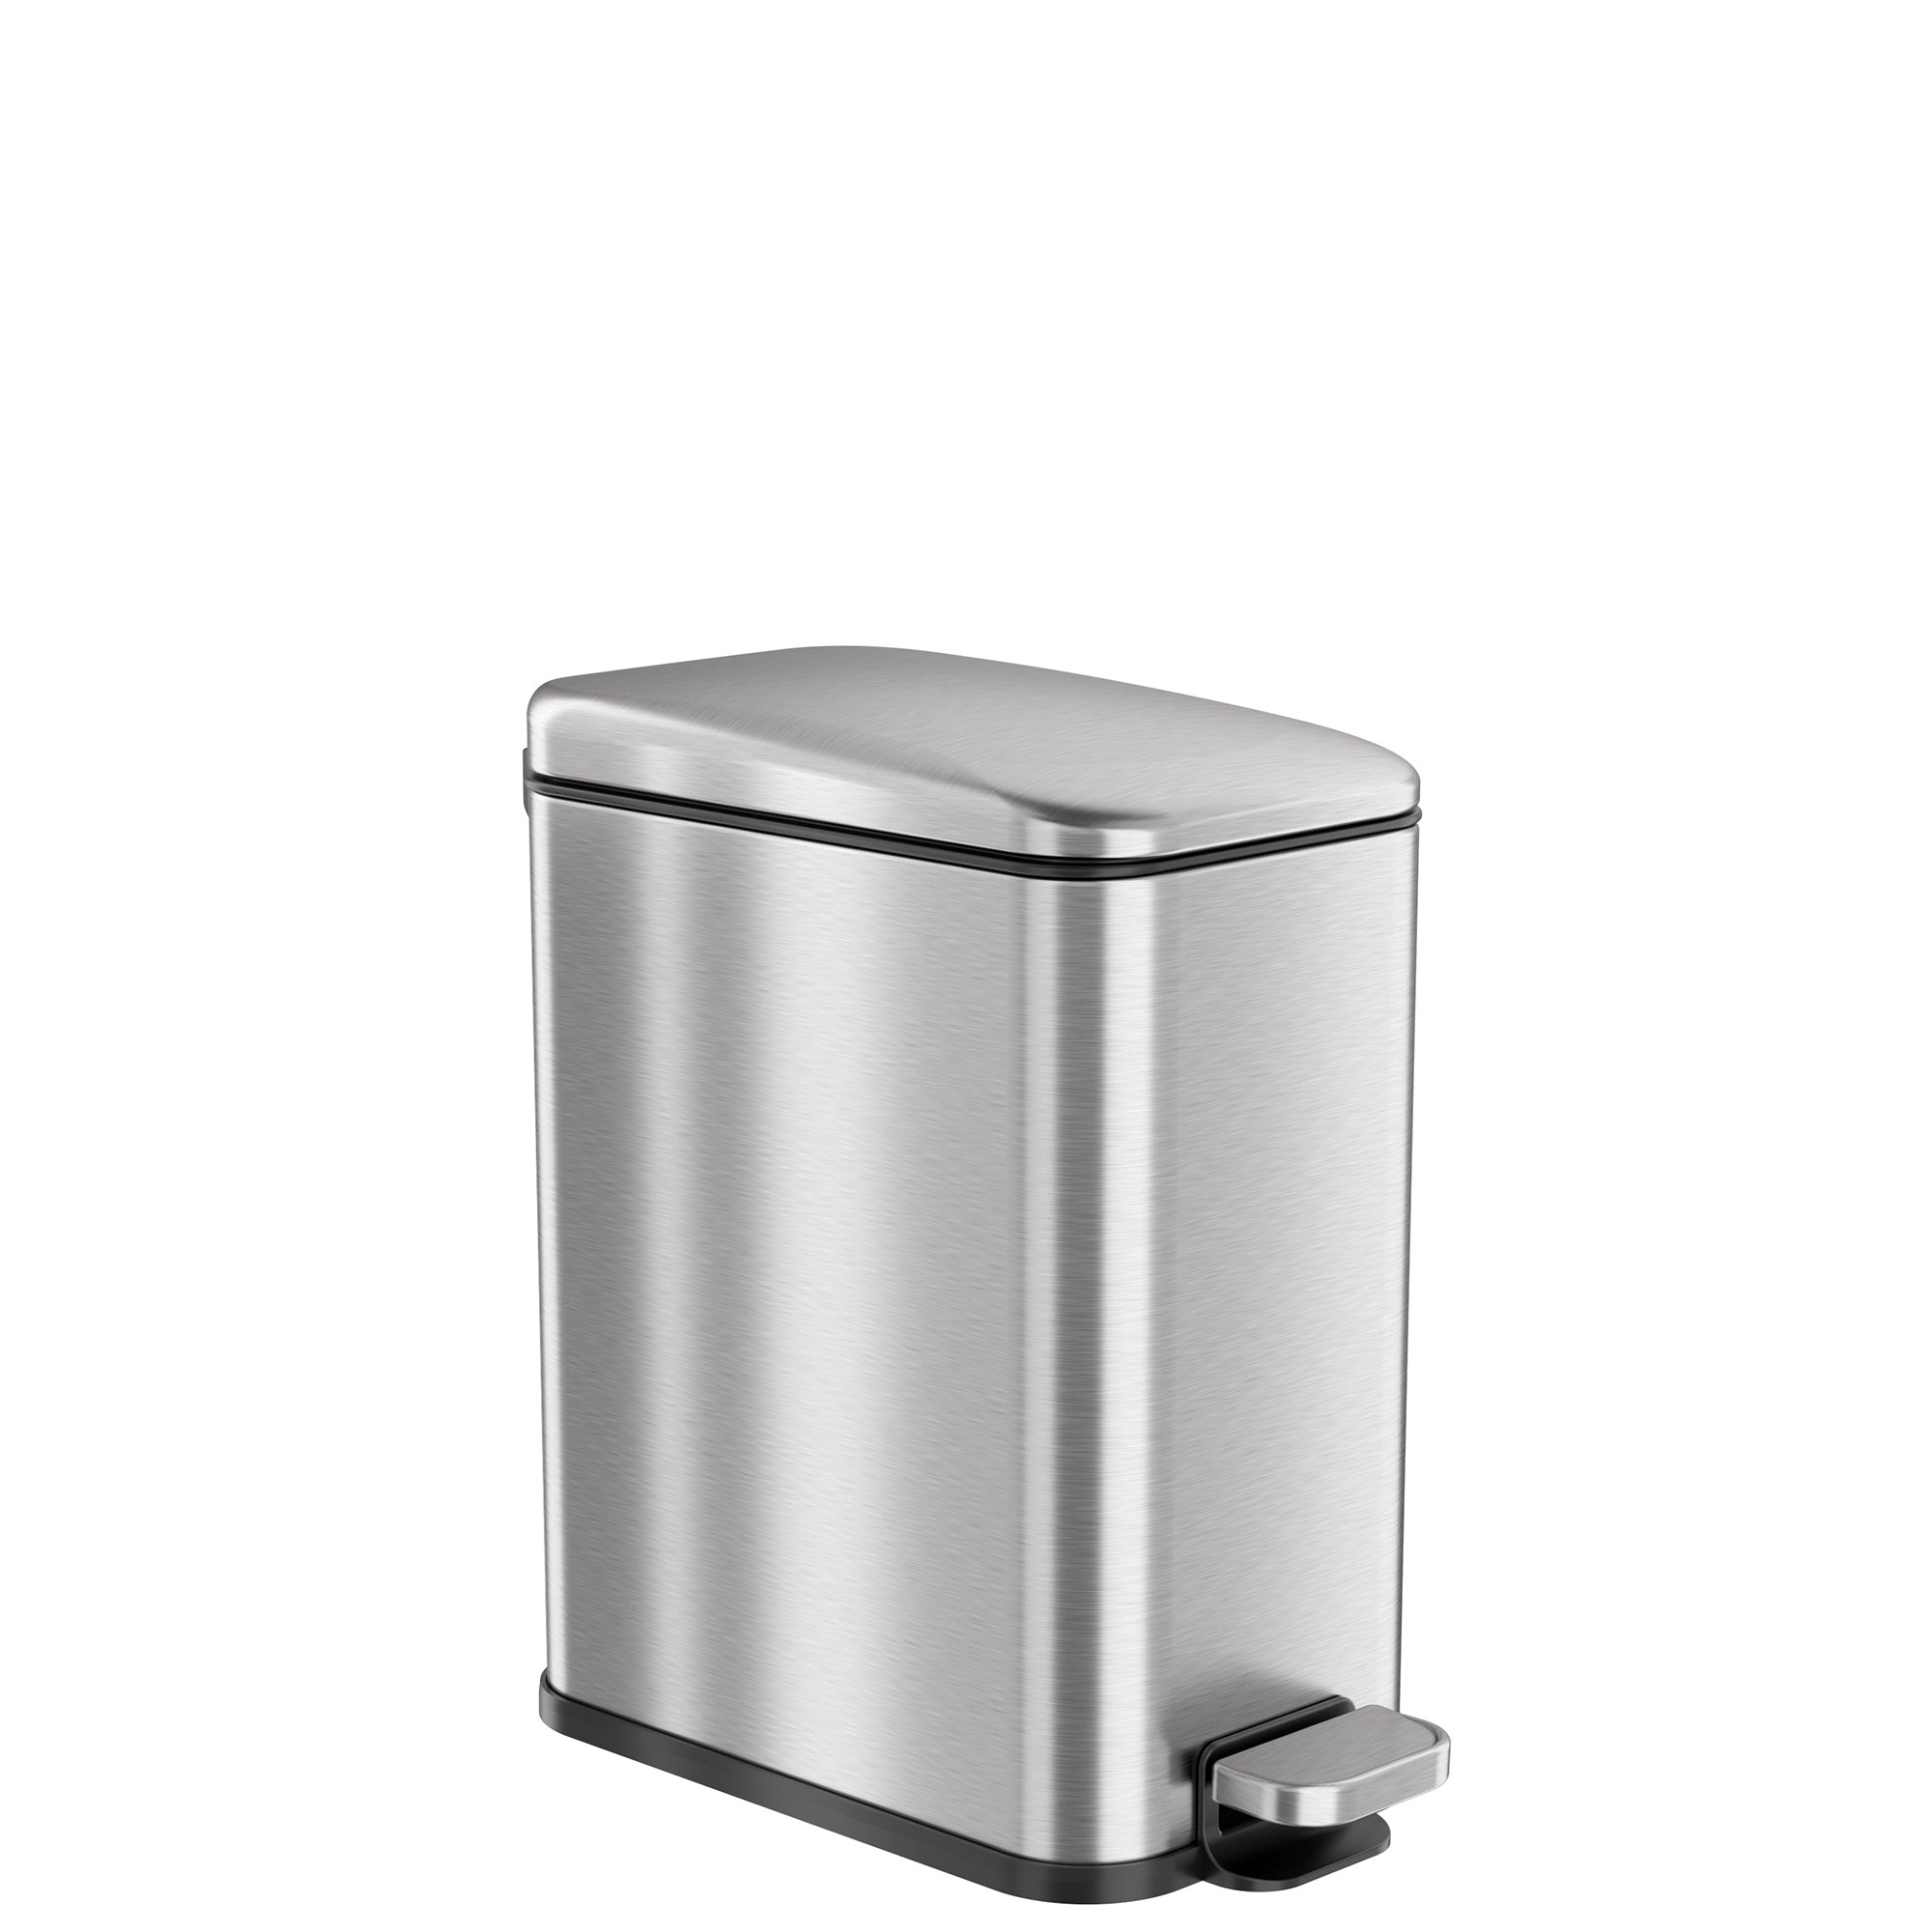 Natural Home 1.3-Gallon Stainless Steel Compost Bin, Silver